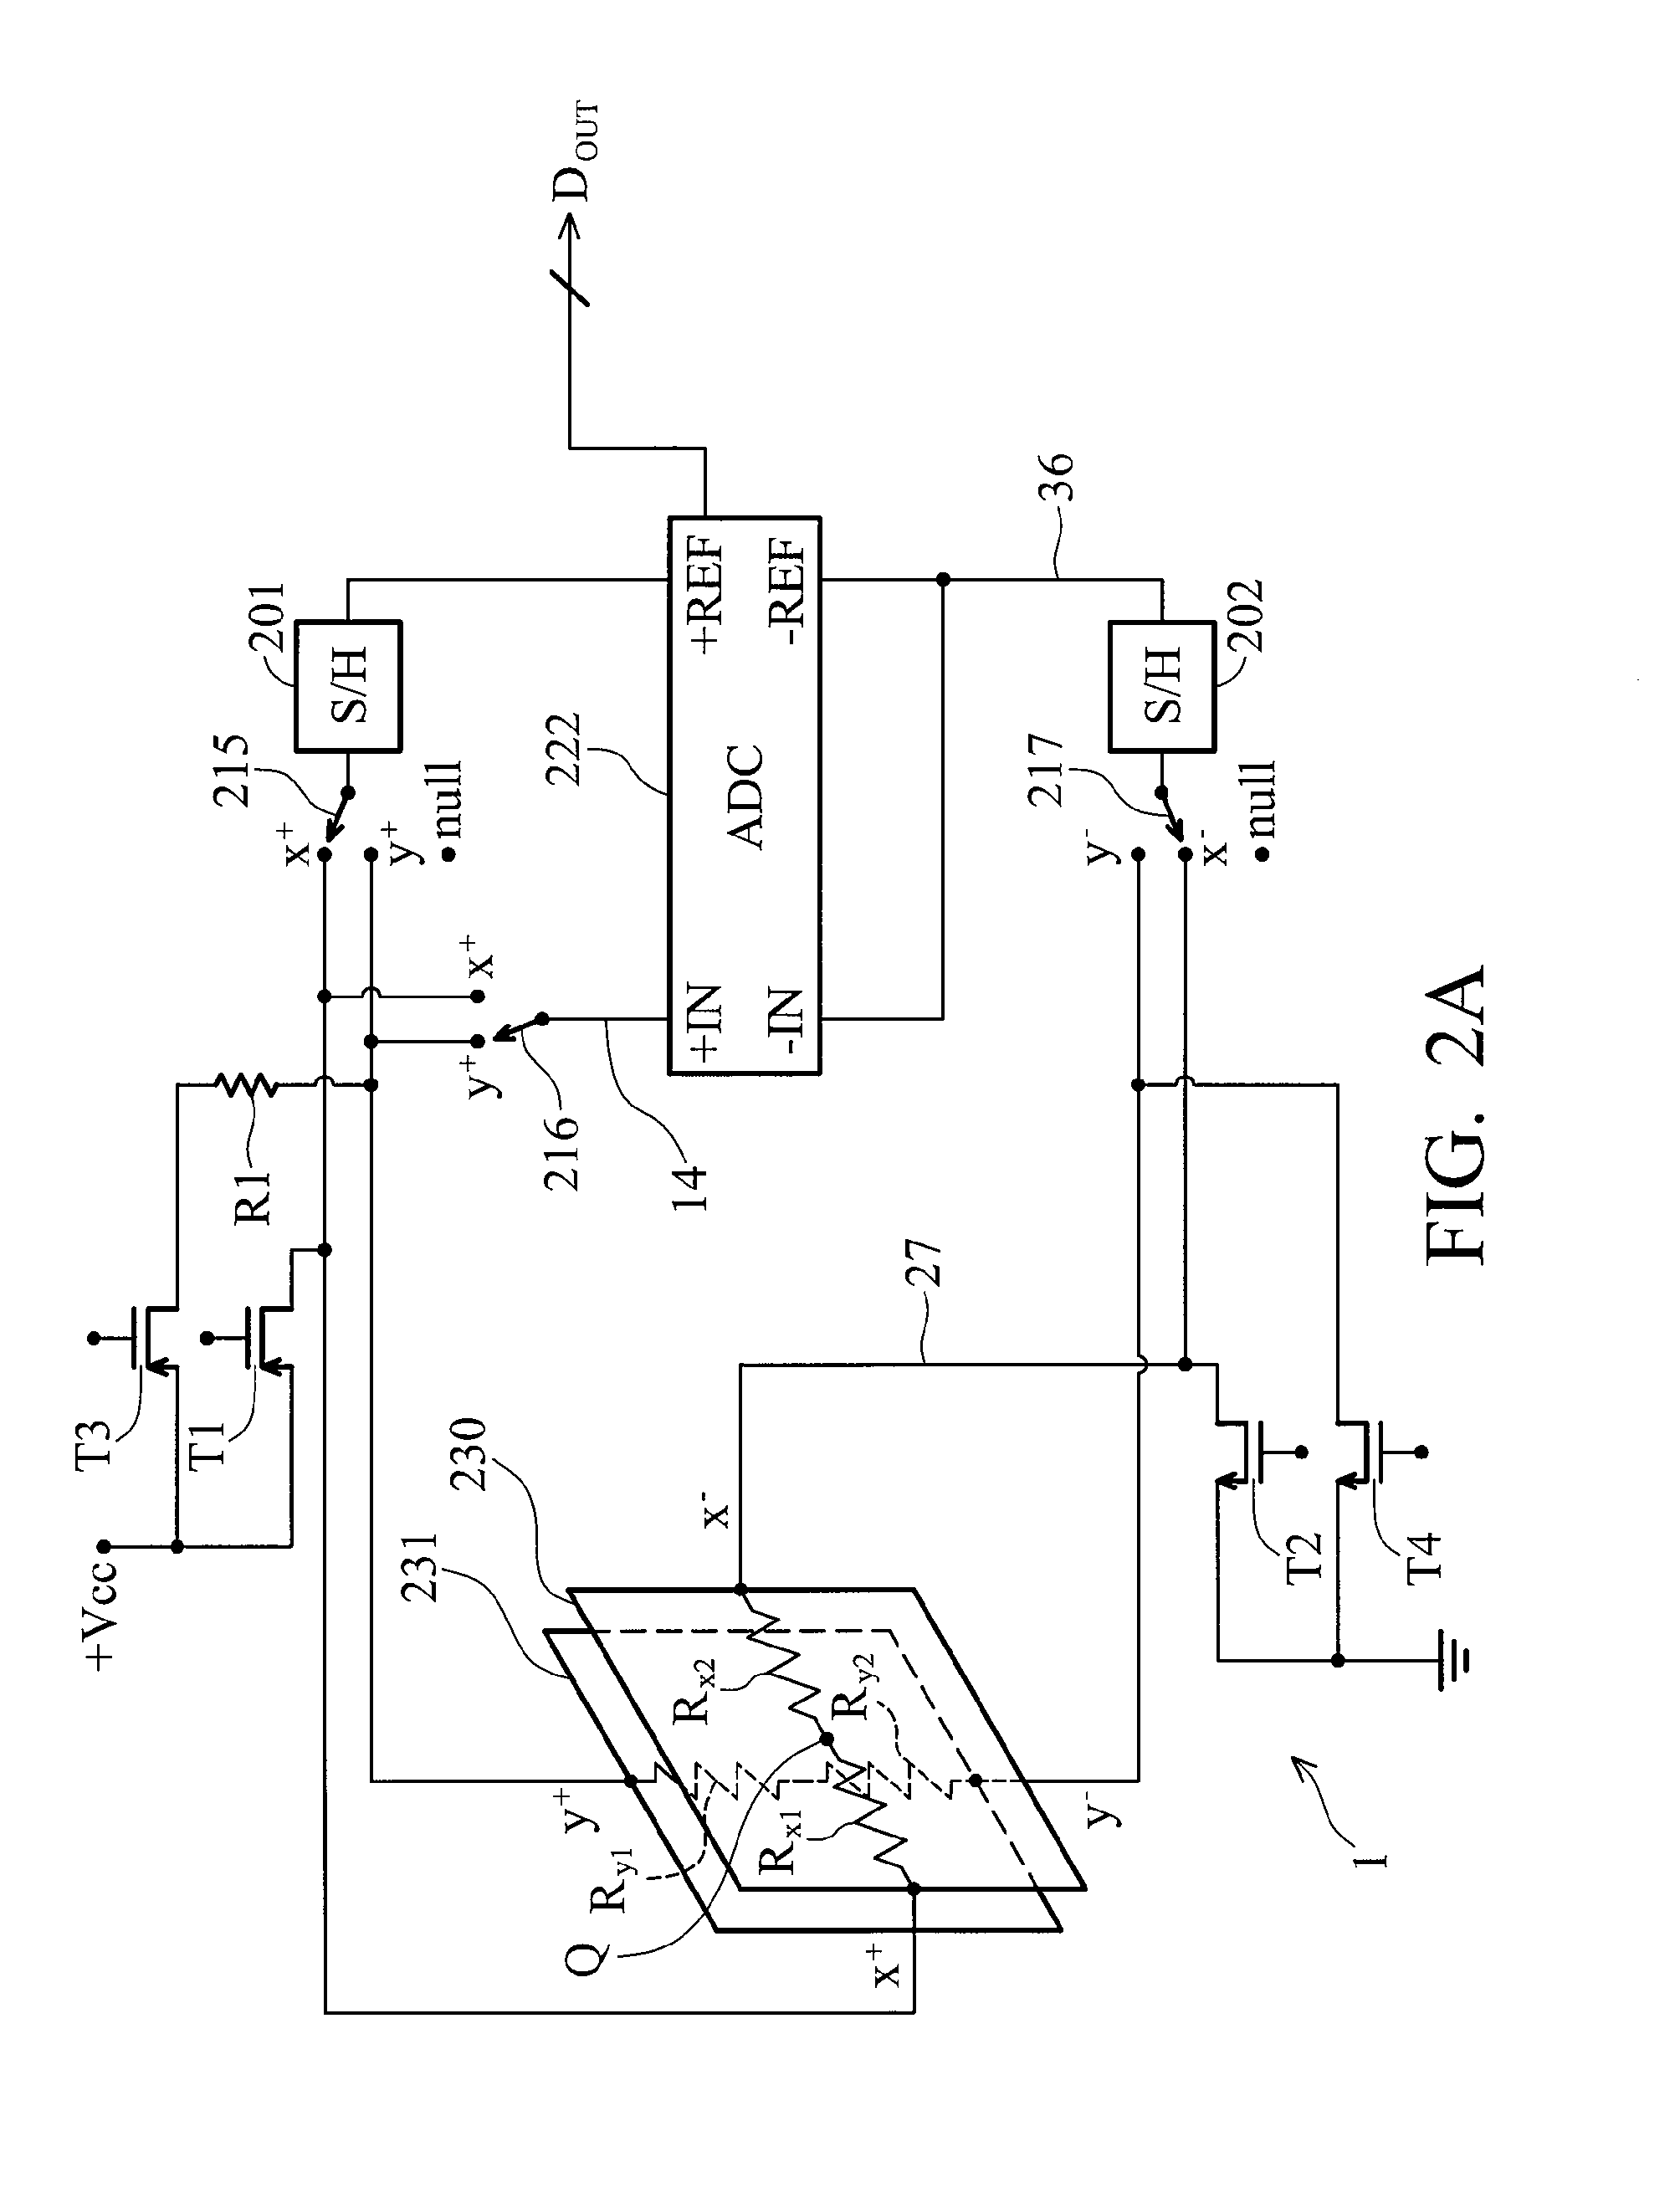 Touch screen measurement circuit and method